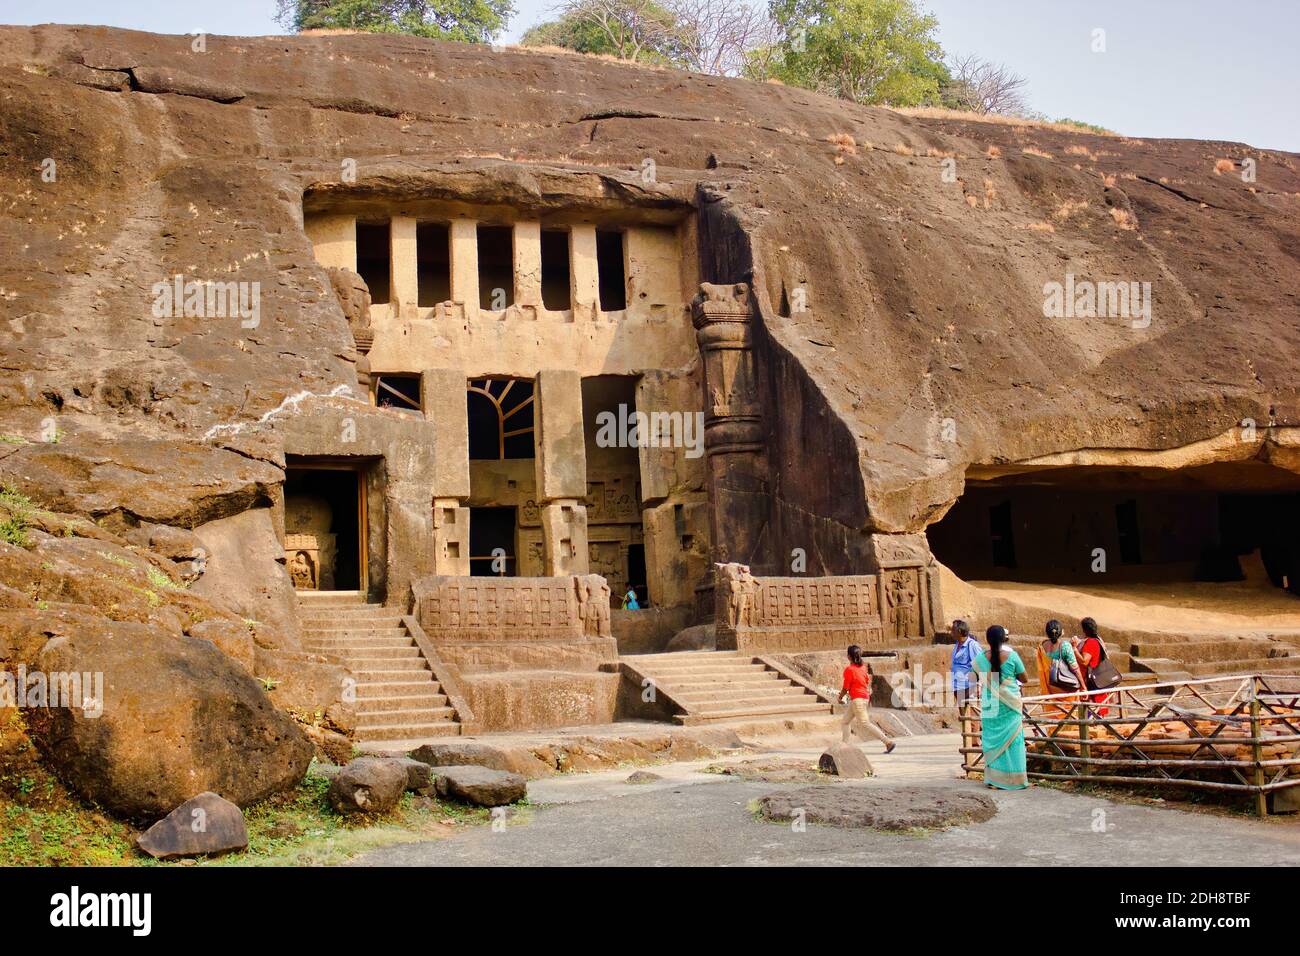 Mumbai, India - October 22, 2018: Exterior of Buddhist heritage cave temple Kanheri cave located in Borivali in Bombay during day time Stock Photo